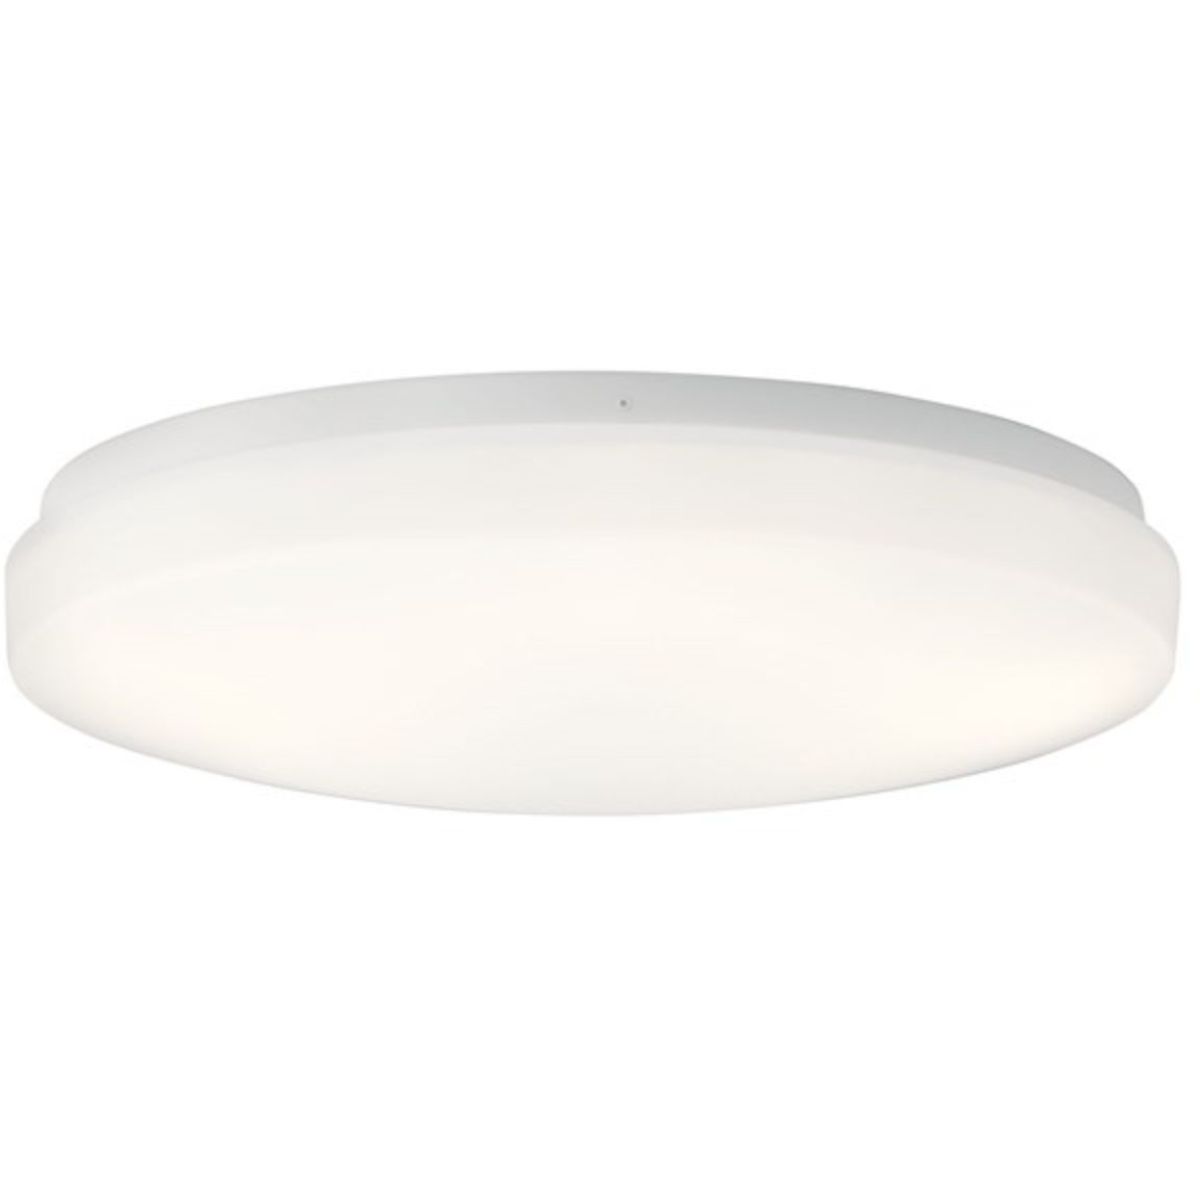 Ceiling Space 16 in. LED Puff Light 1850 Lumens 3000K White finish